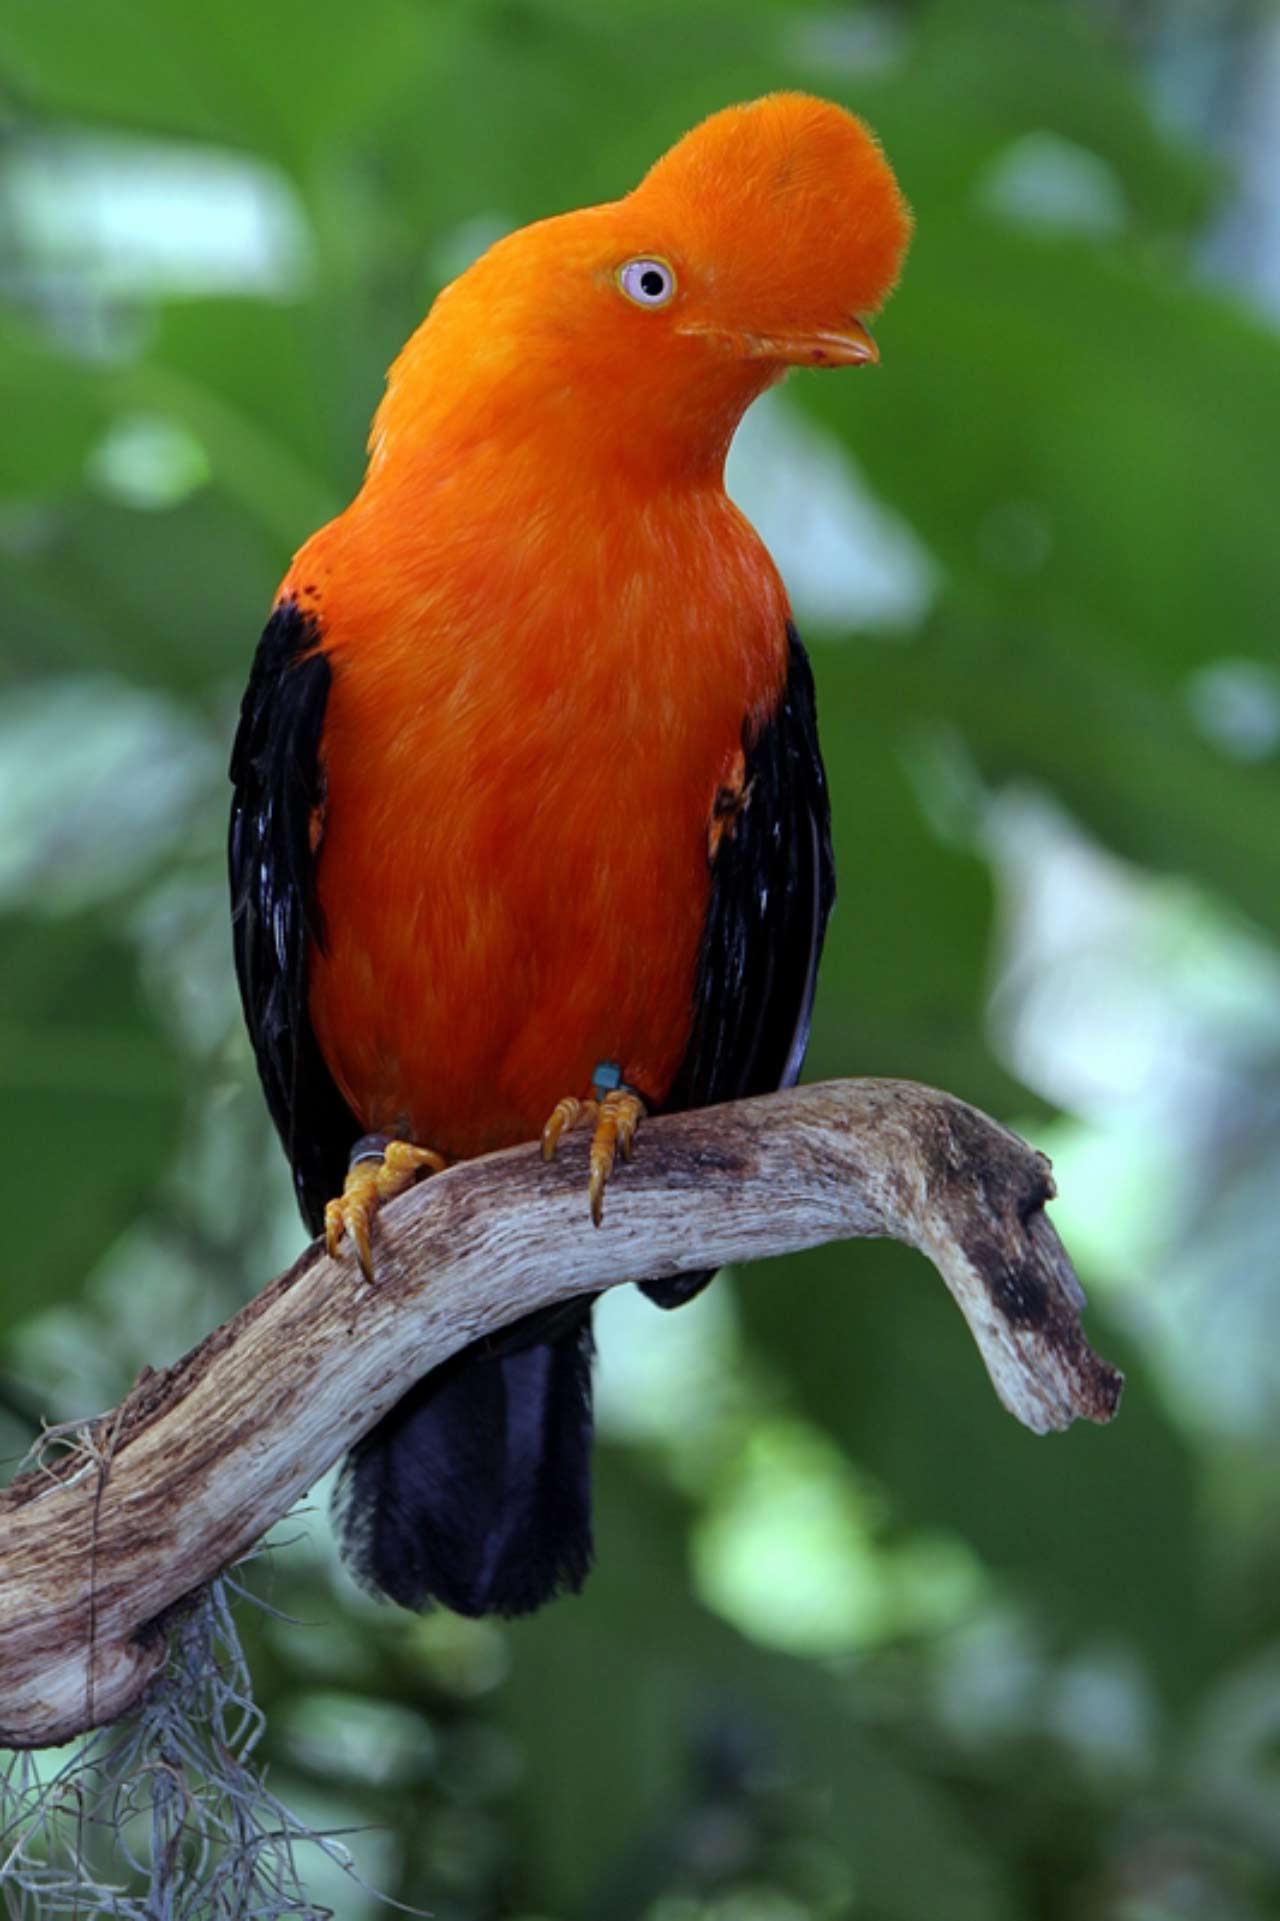 Ornithologists Map Family Tree of Mysterious Cotinga Birds | Biology ...